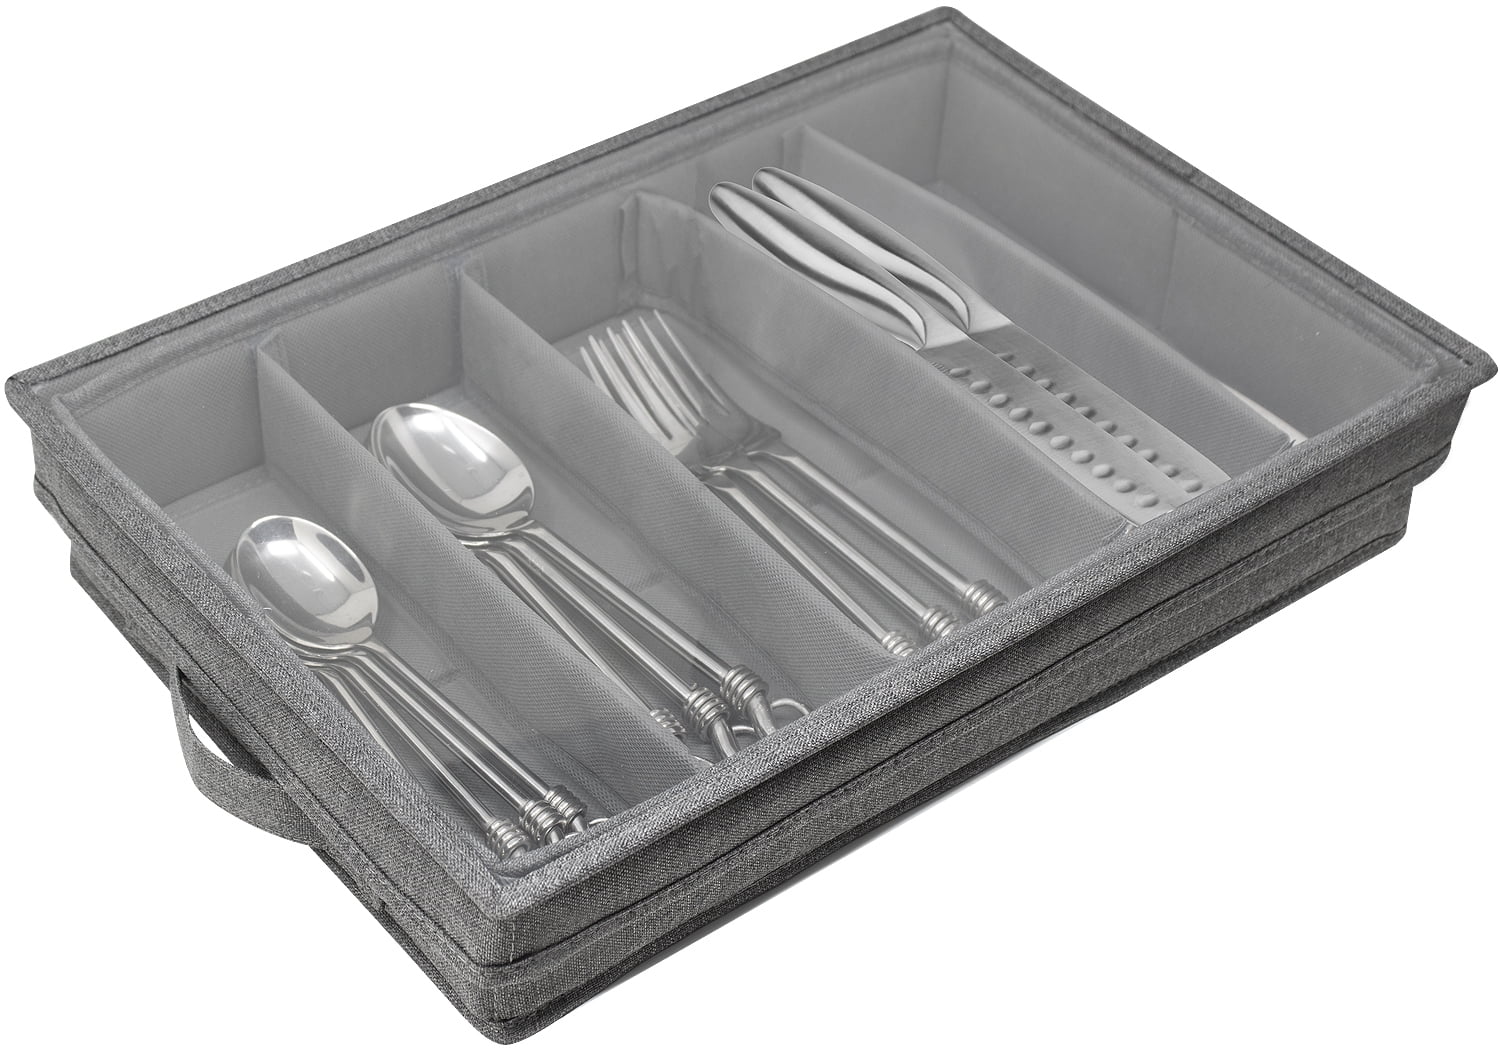 Cutlery Flatware Knives Flatware Storage Case Large Capacity Gray Fabric Container Holder for Organizing Utensils Silverware Storage Box Chest with Adjustable Dividers 